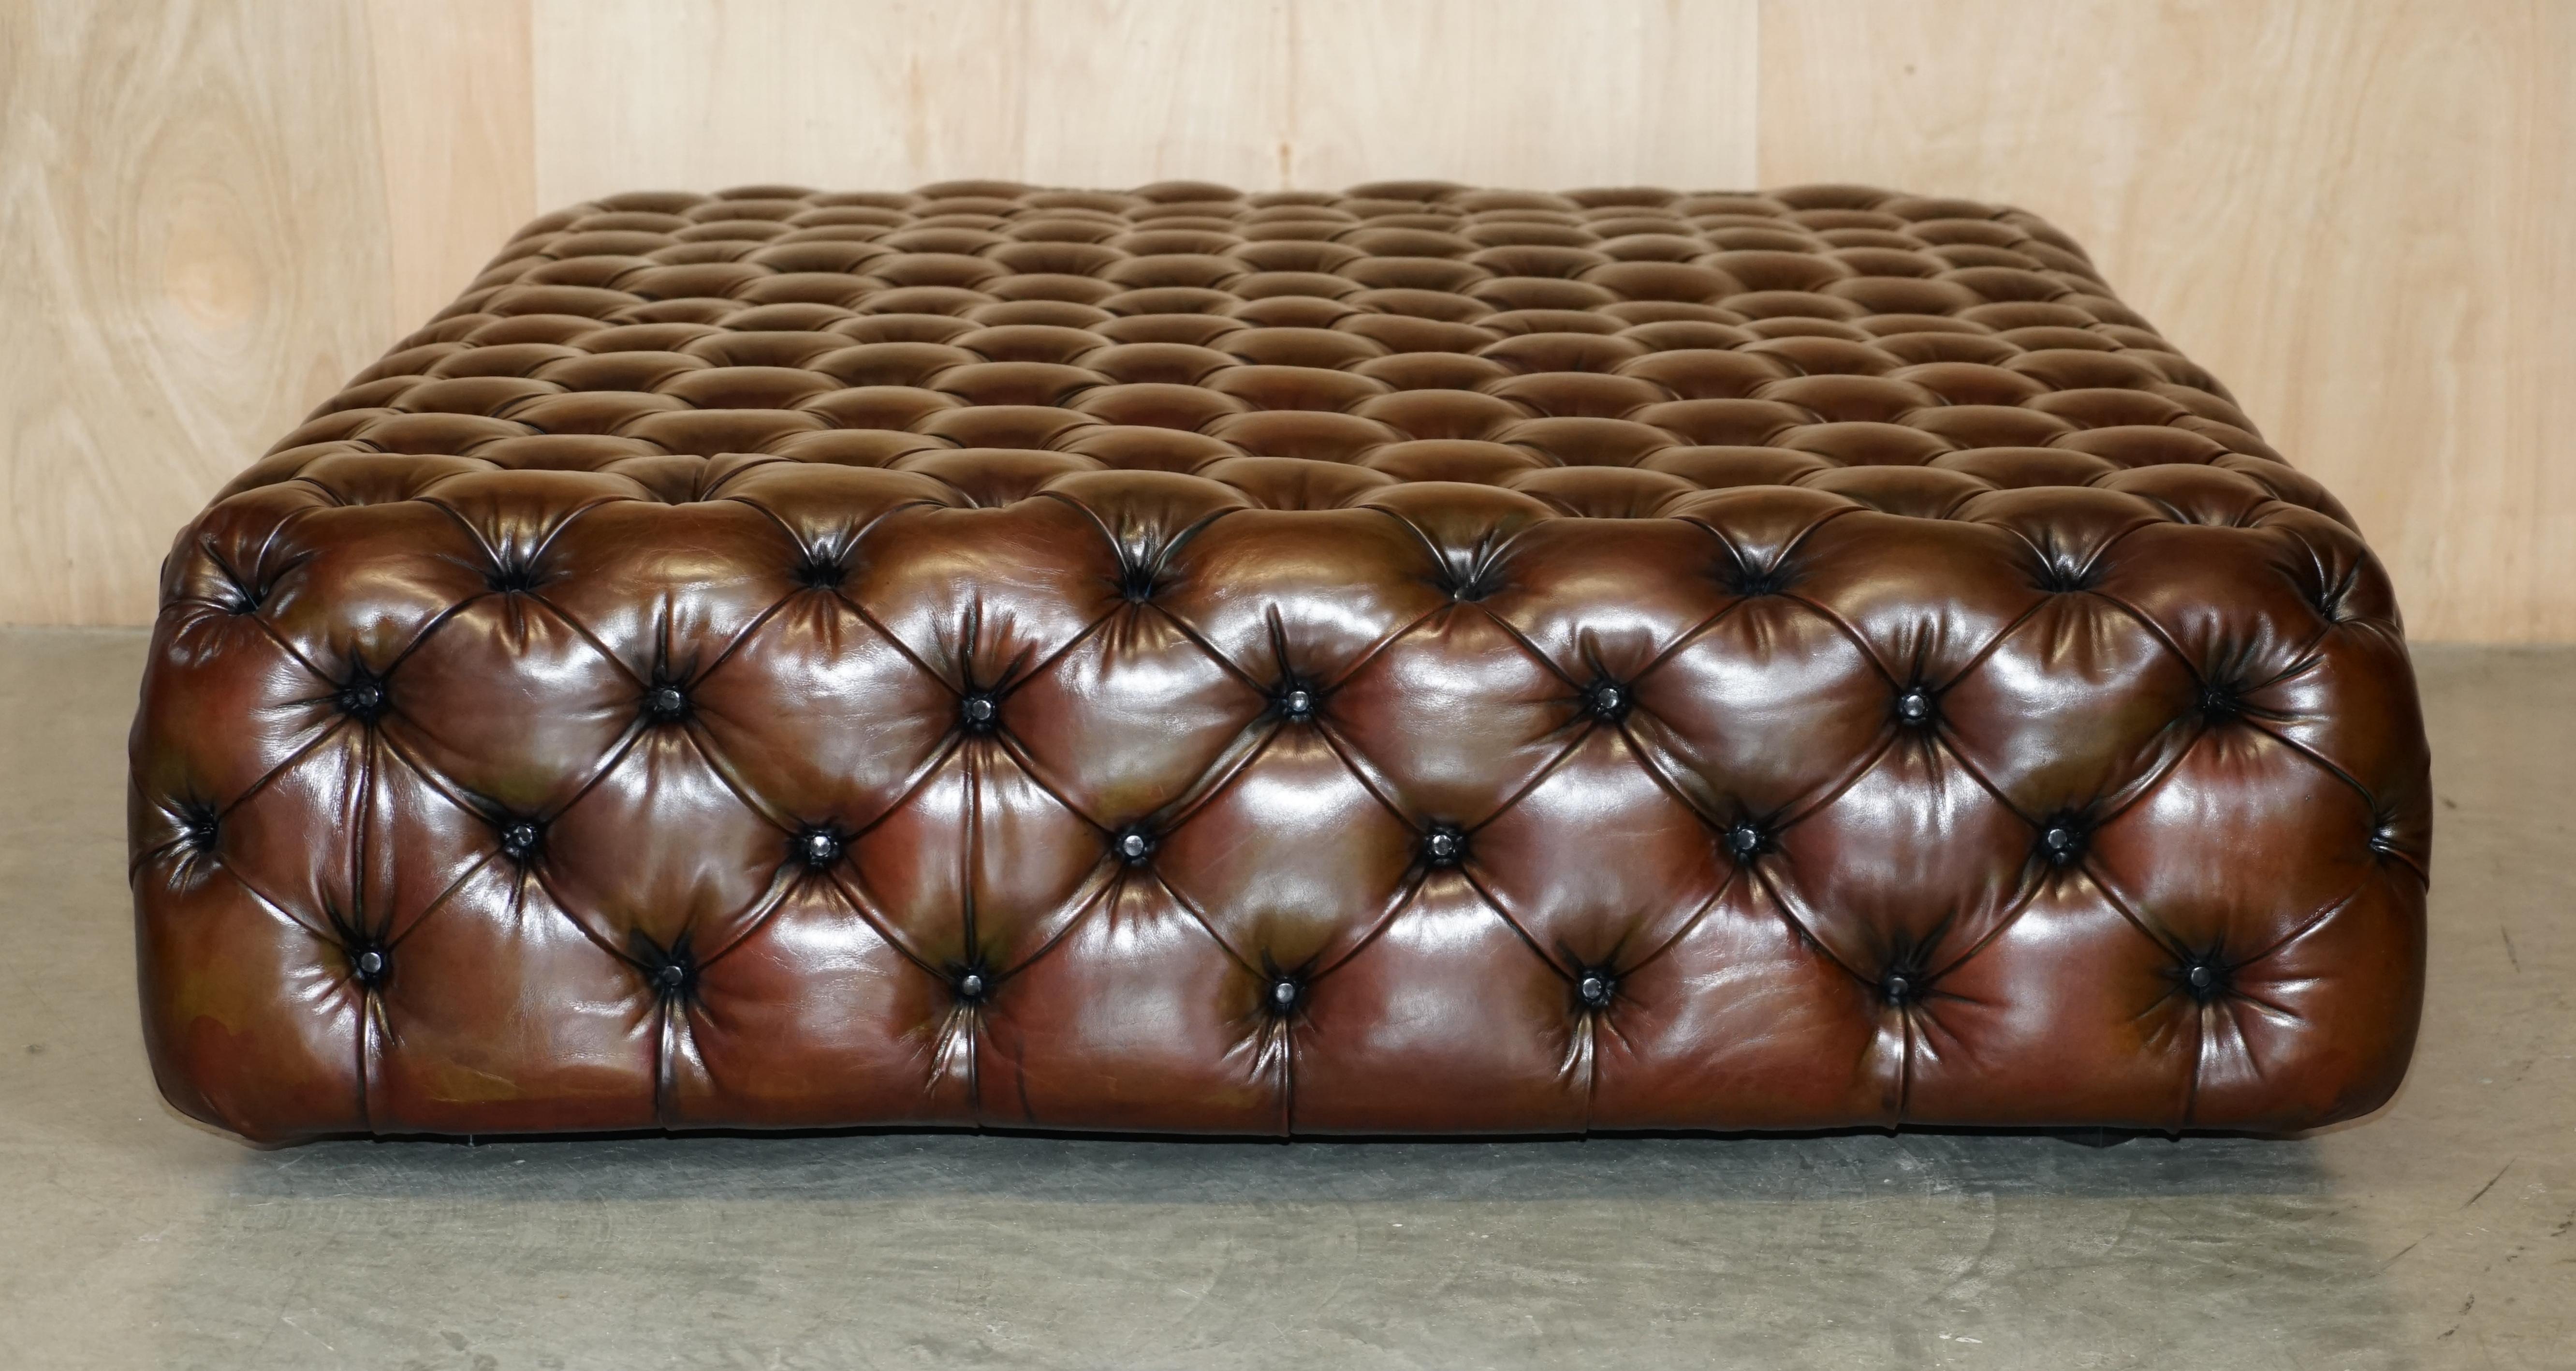 MONUMENTAL GEORGE SMITH RESTORED BROWN LEATHER CHESTERFiELD FOOTSTOOL OTTOMAN For Sale 11